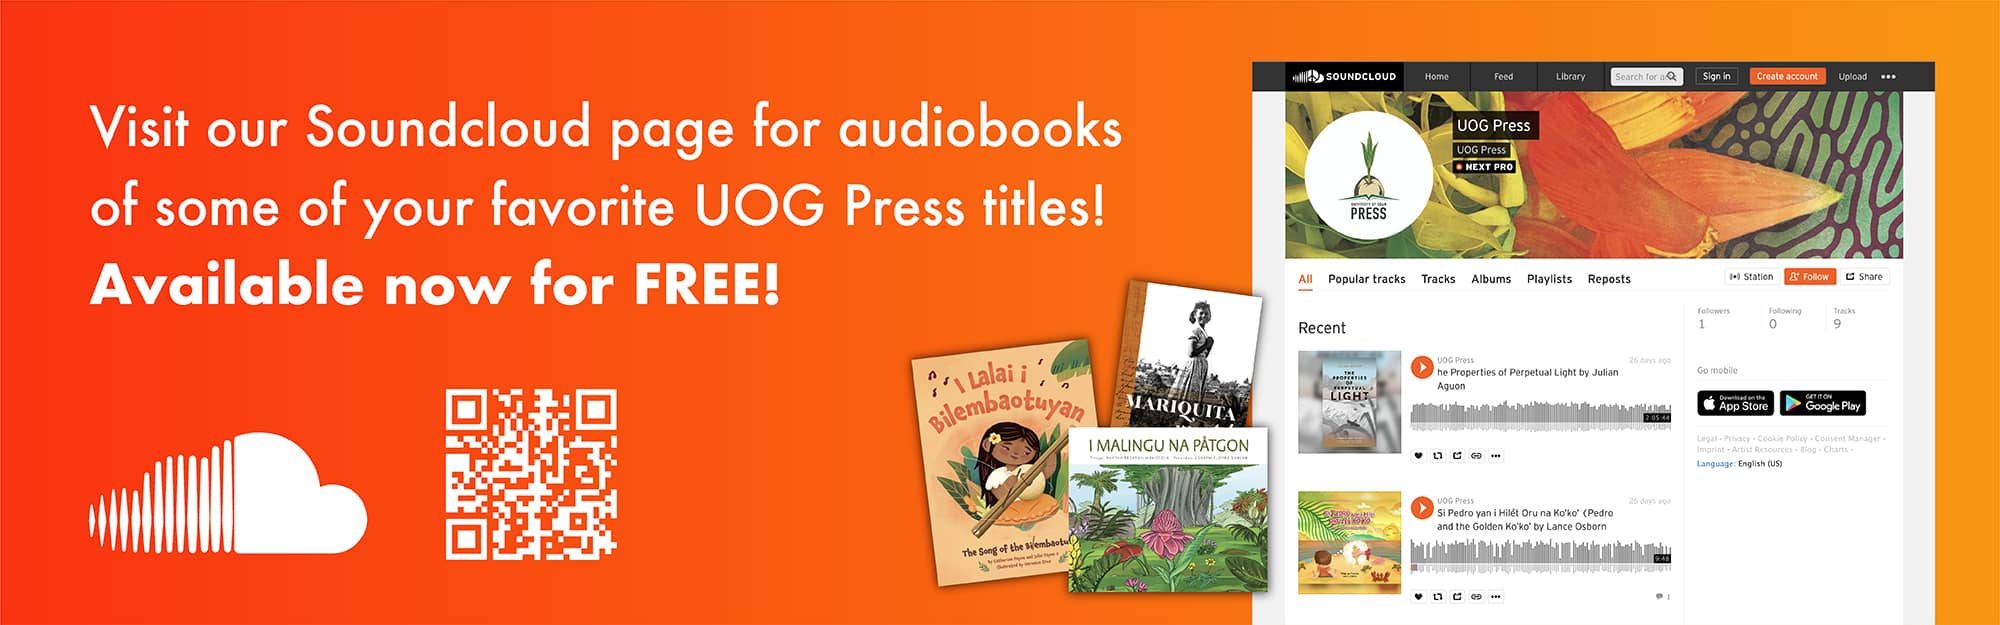 Click here to access free audiobooks of some of your favorite UOG Press titles